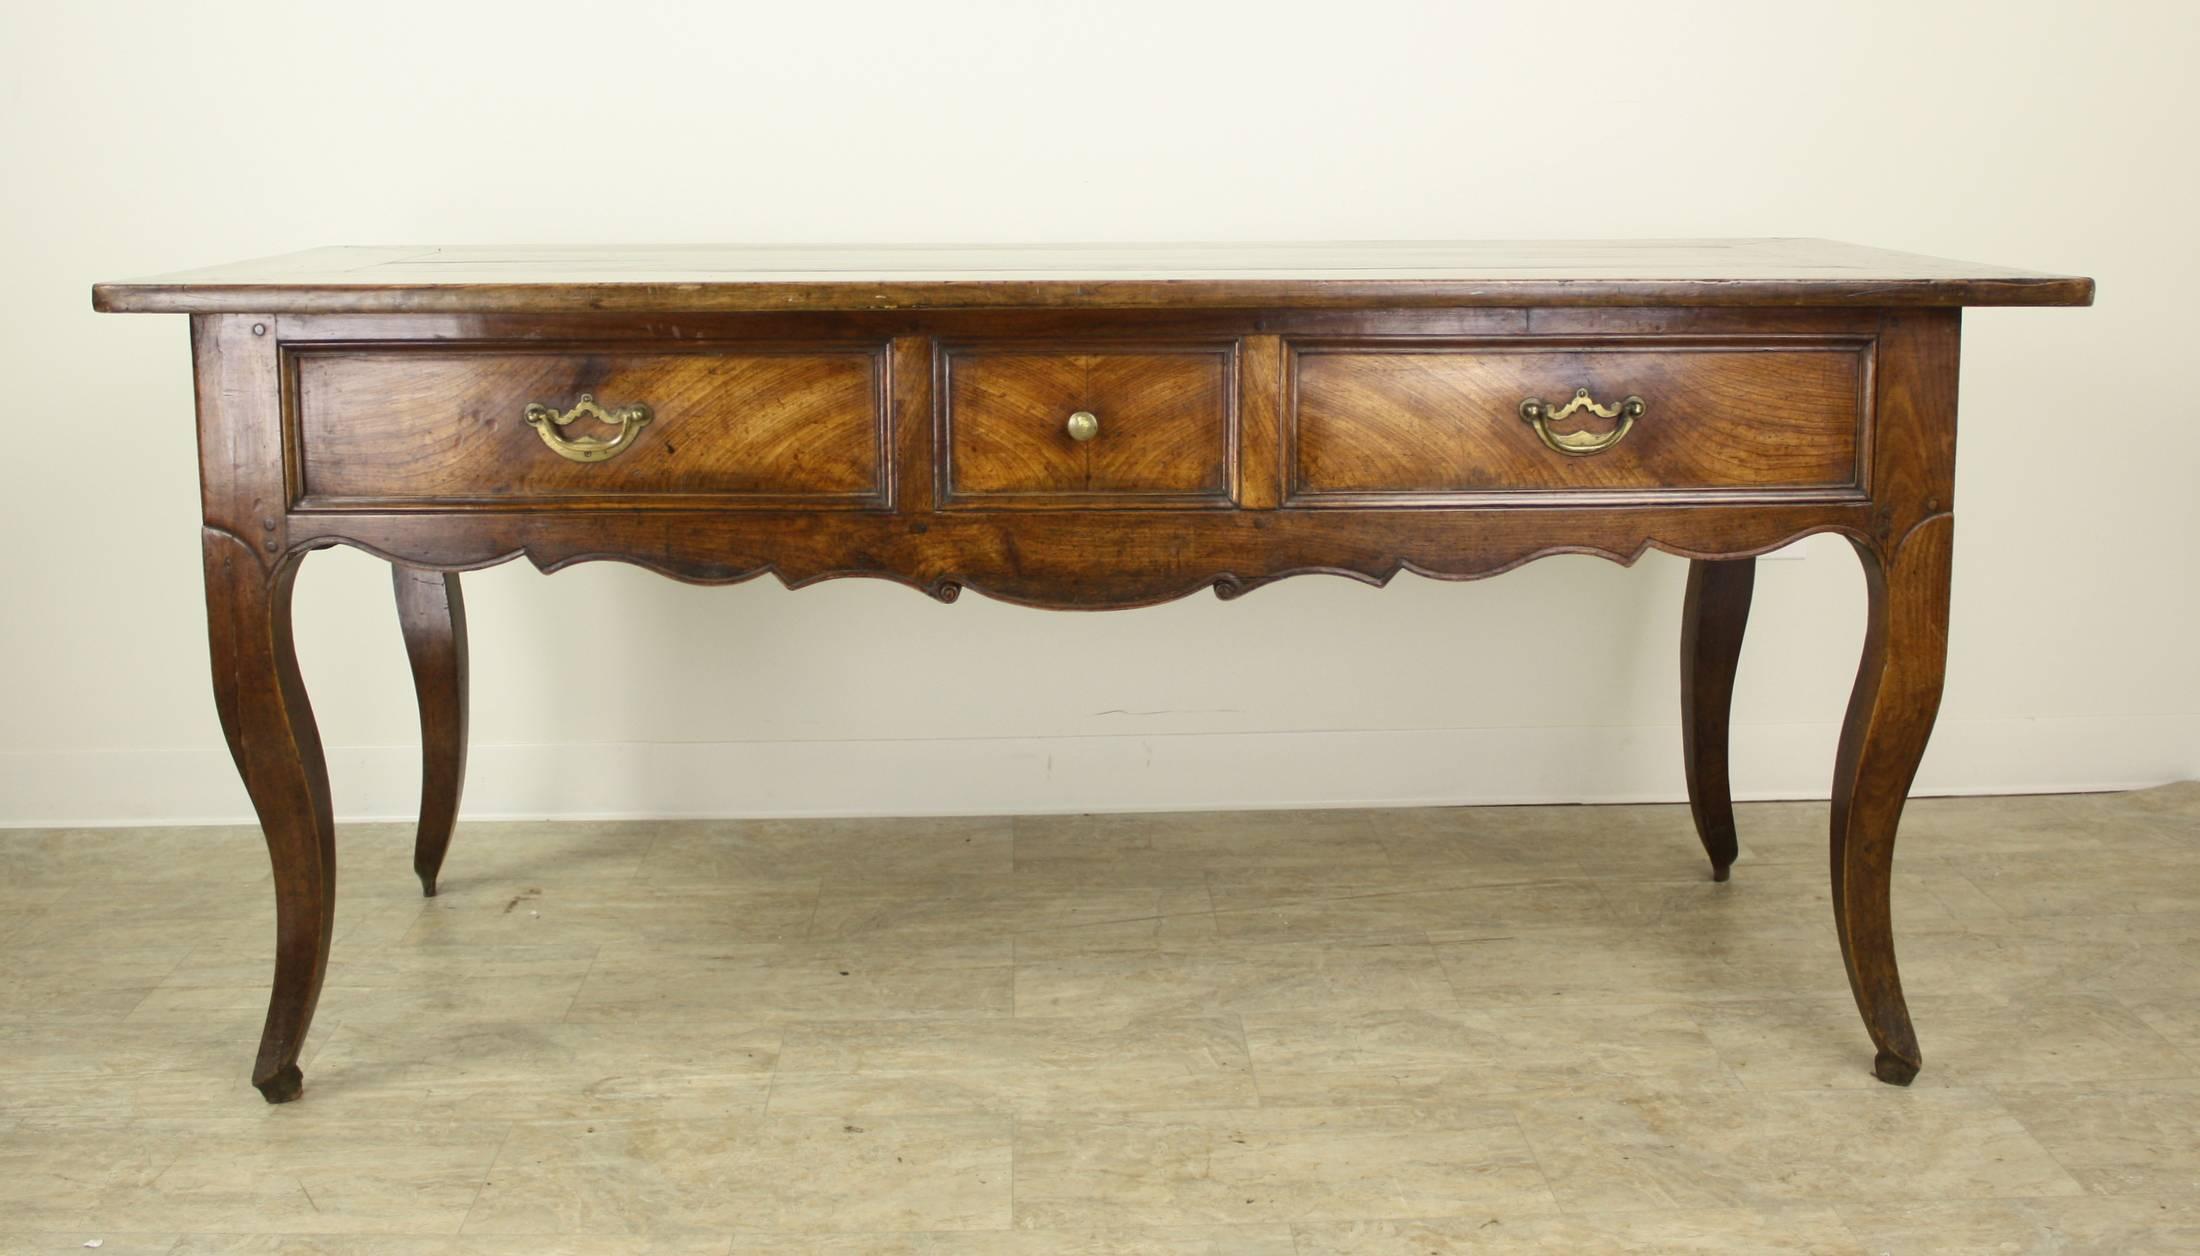 A fabulous Louis XV desk. The front boasts a faux three-drawer facade with wonderful grain and charming carved details. The back, or seating side, has three real drawers and an apron height of 25